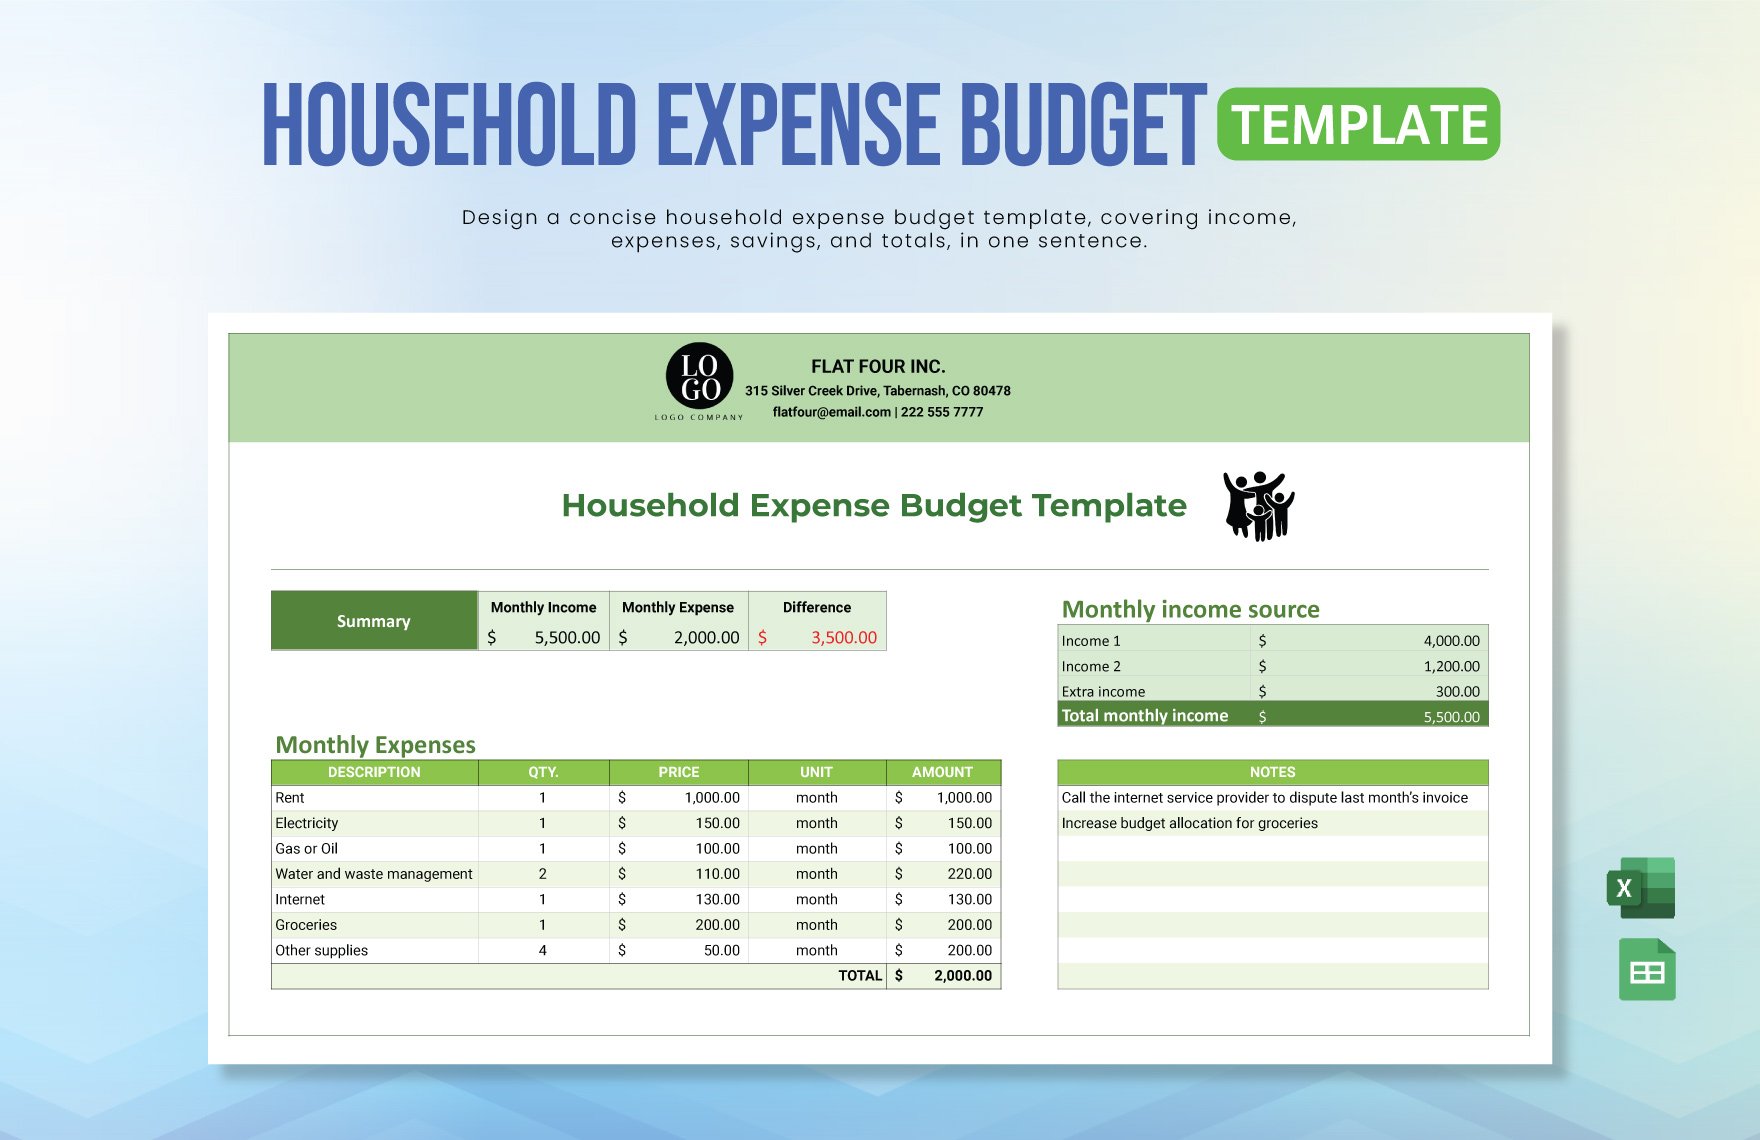 Free Household Expense Budget Template in Excel, Google Sheets